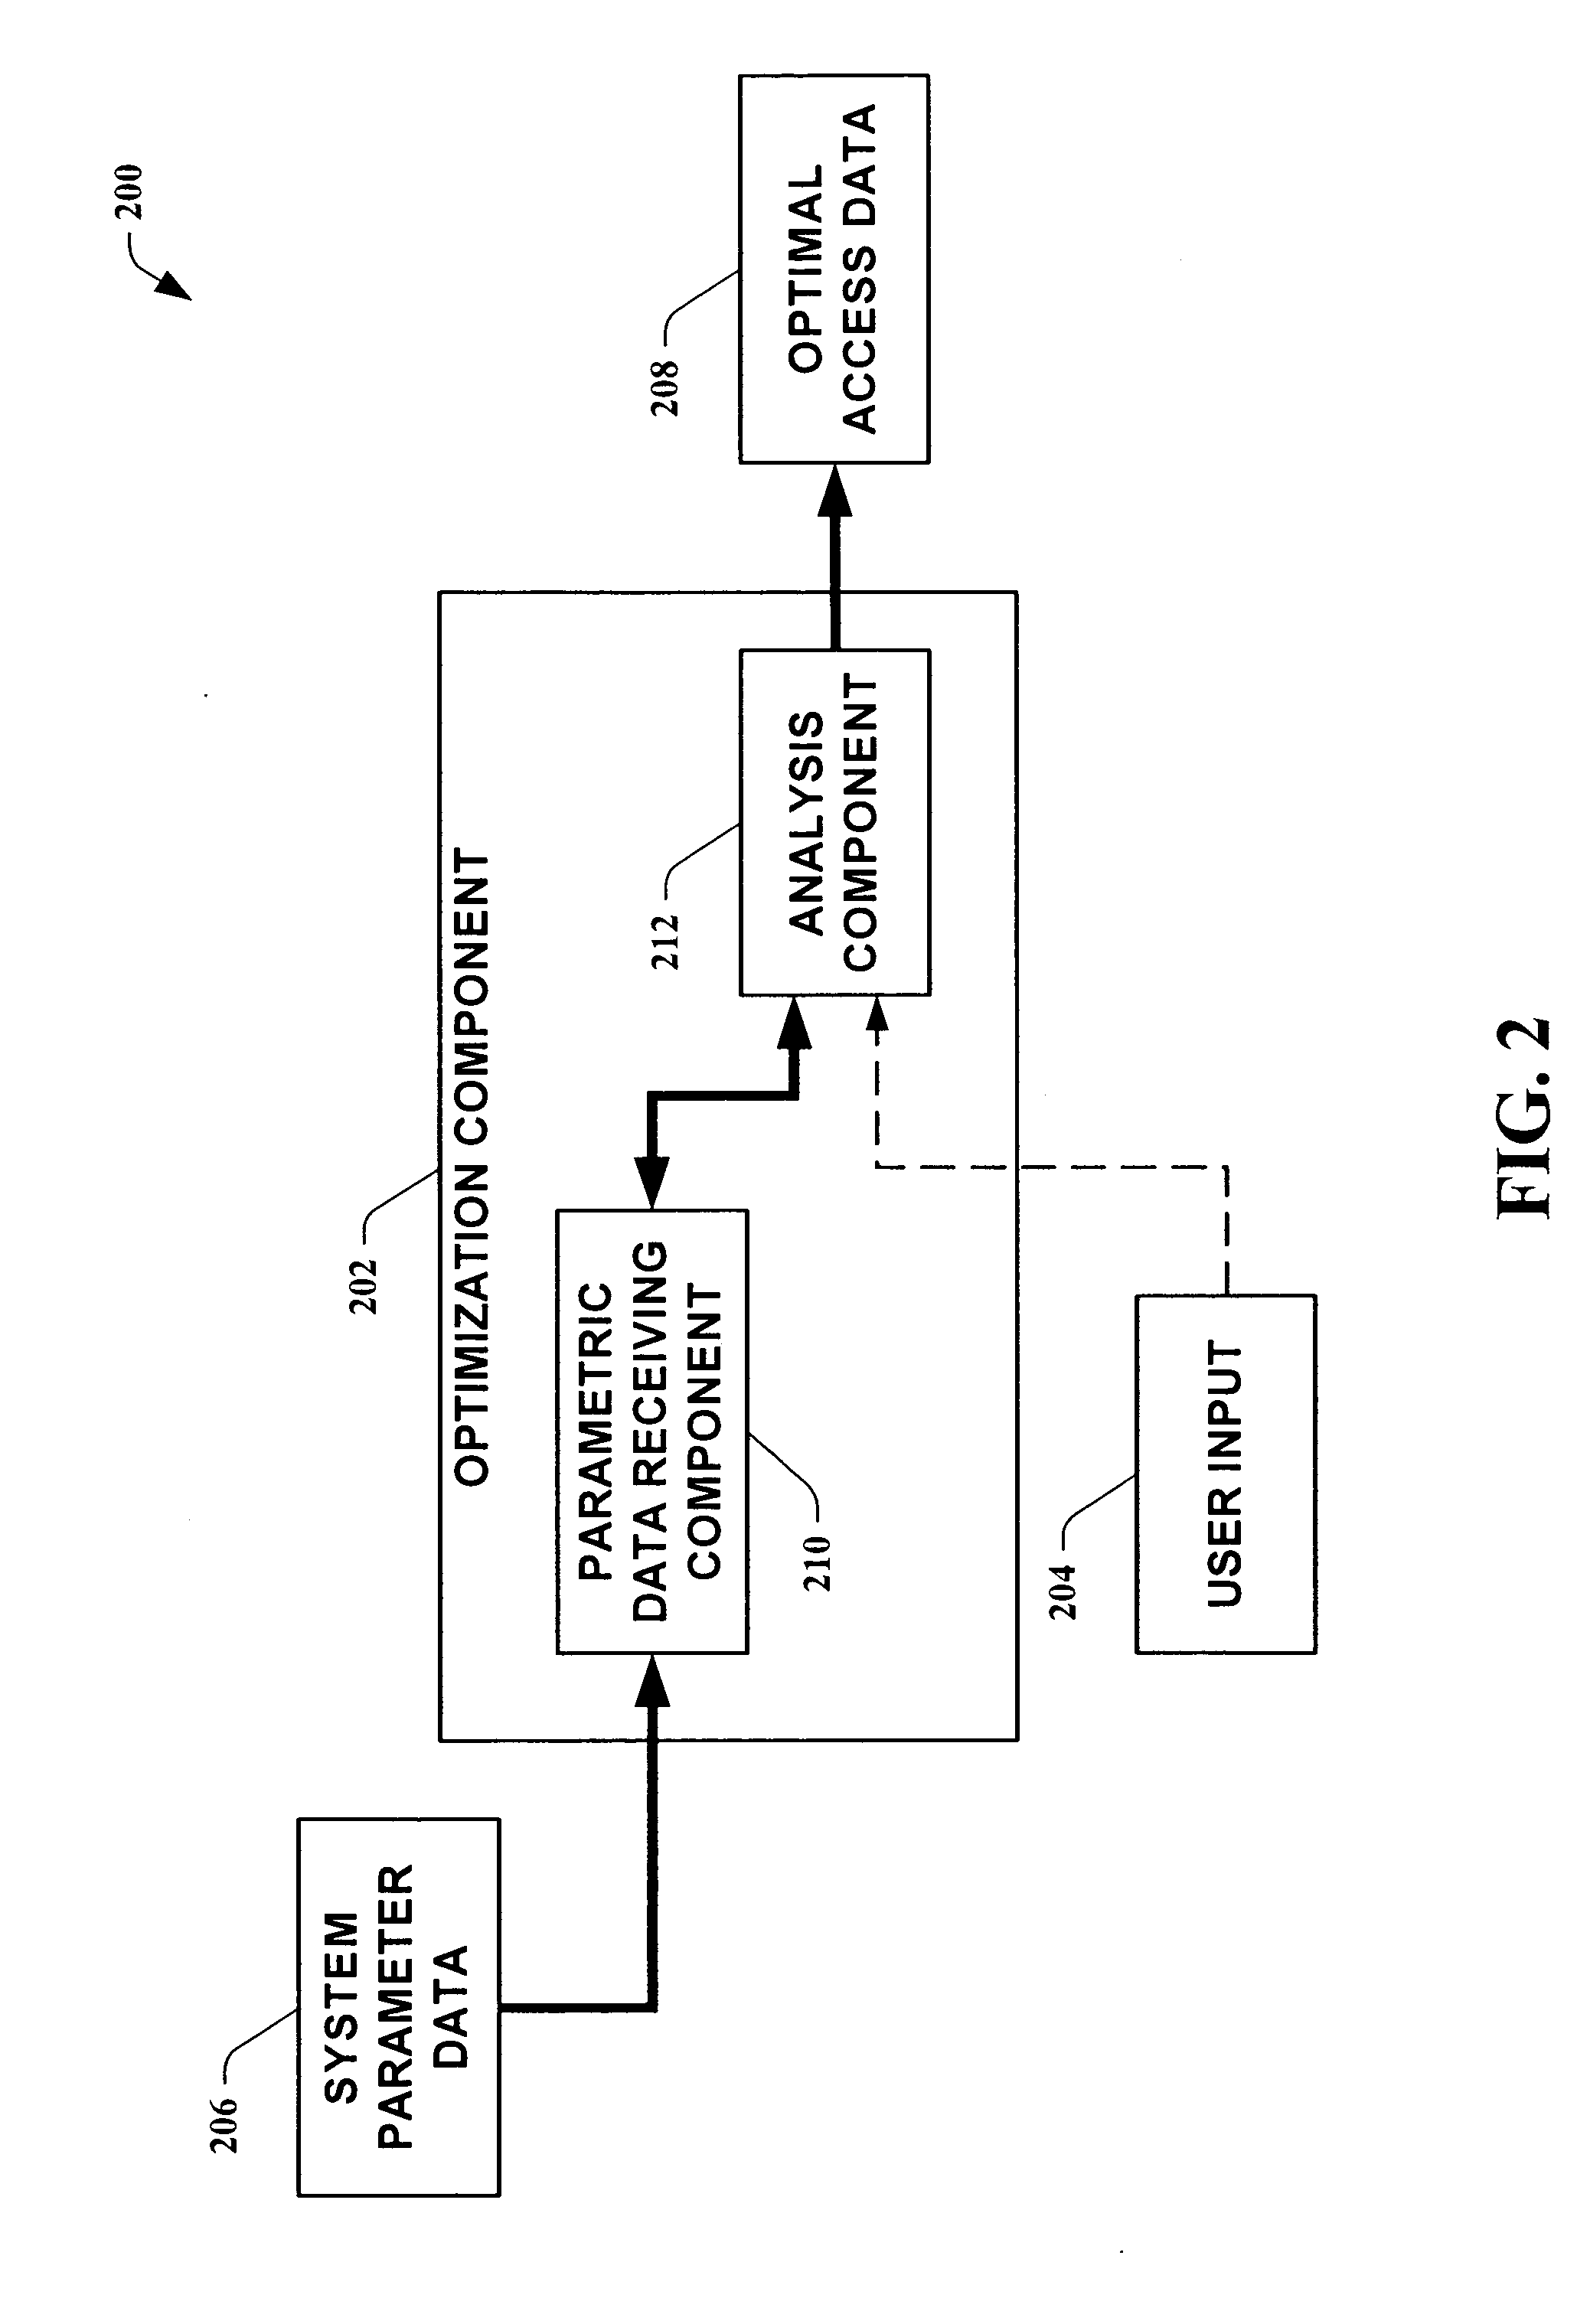 Systems and methods for approximating optimal distribution via networked systems